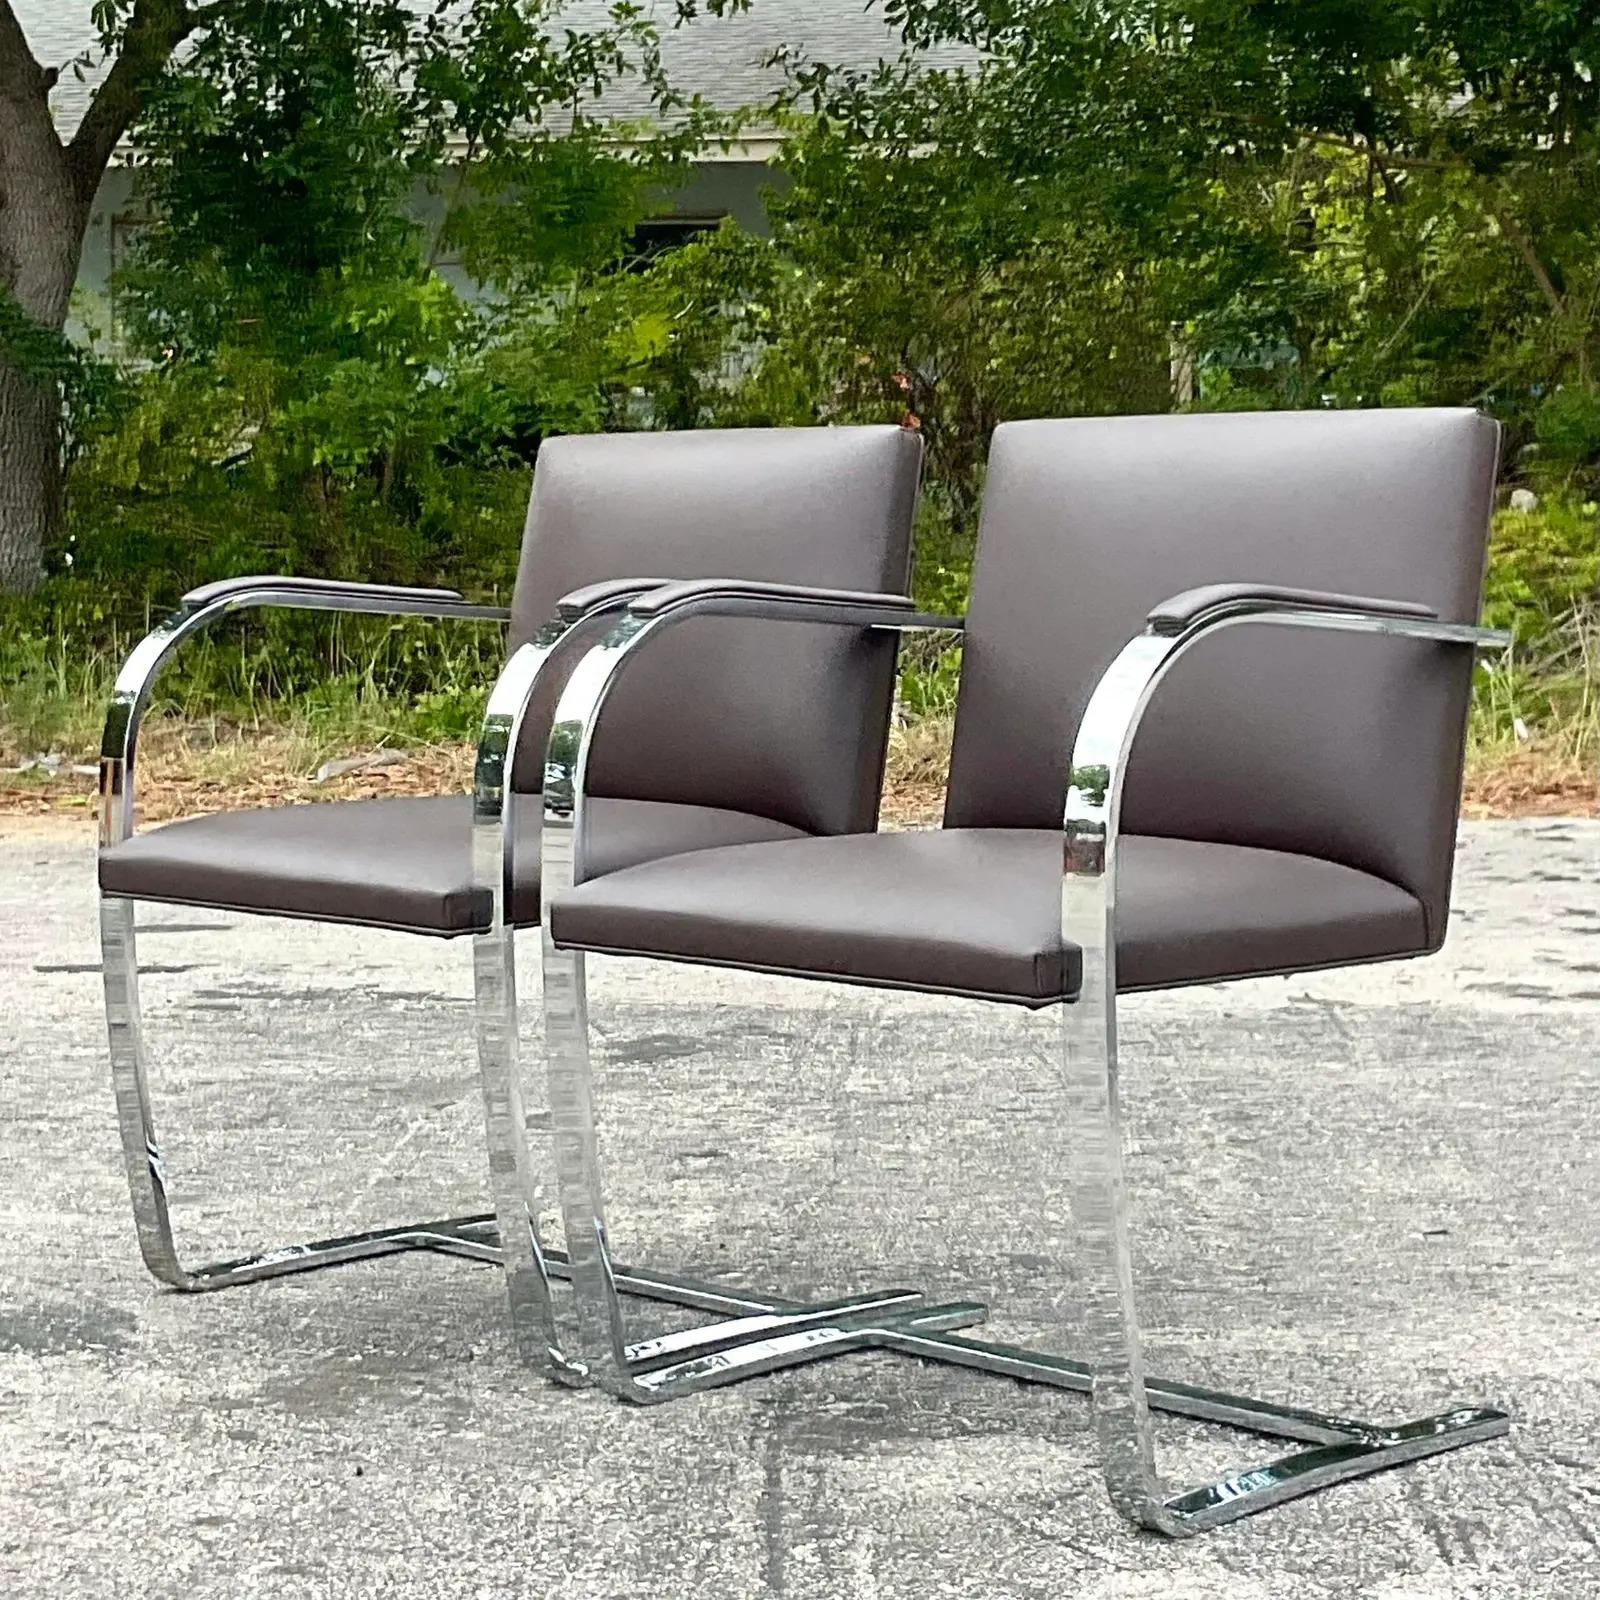 North American Vintage Contemporary Signed Mies Van Der Rohe for Knoll Brno Flat Bar Chairs, a